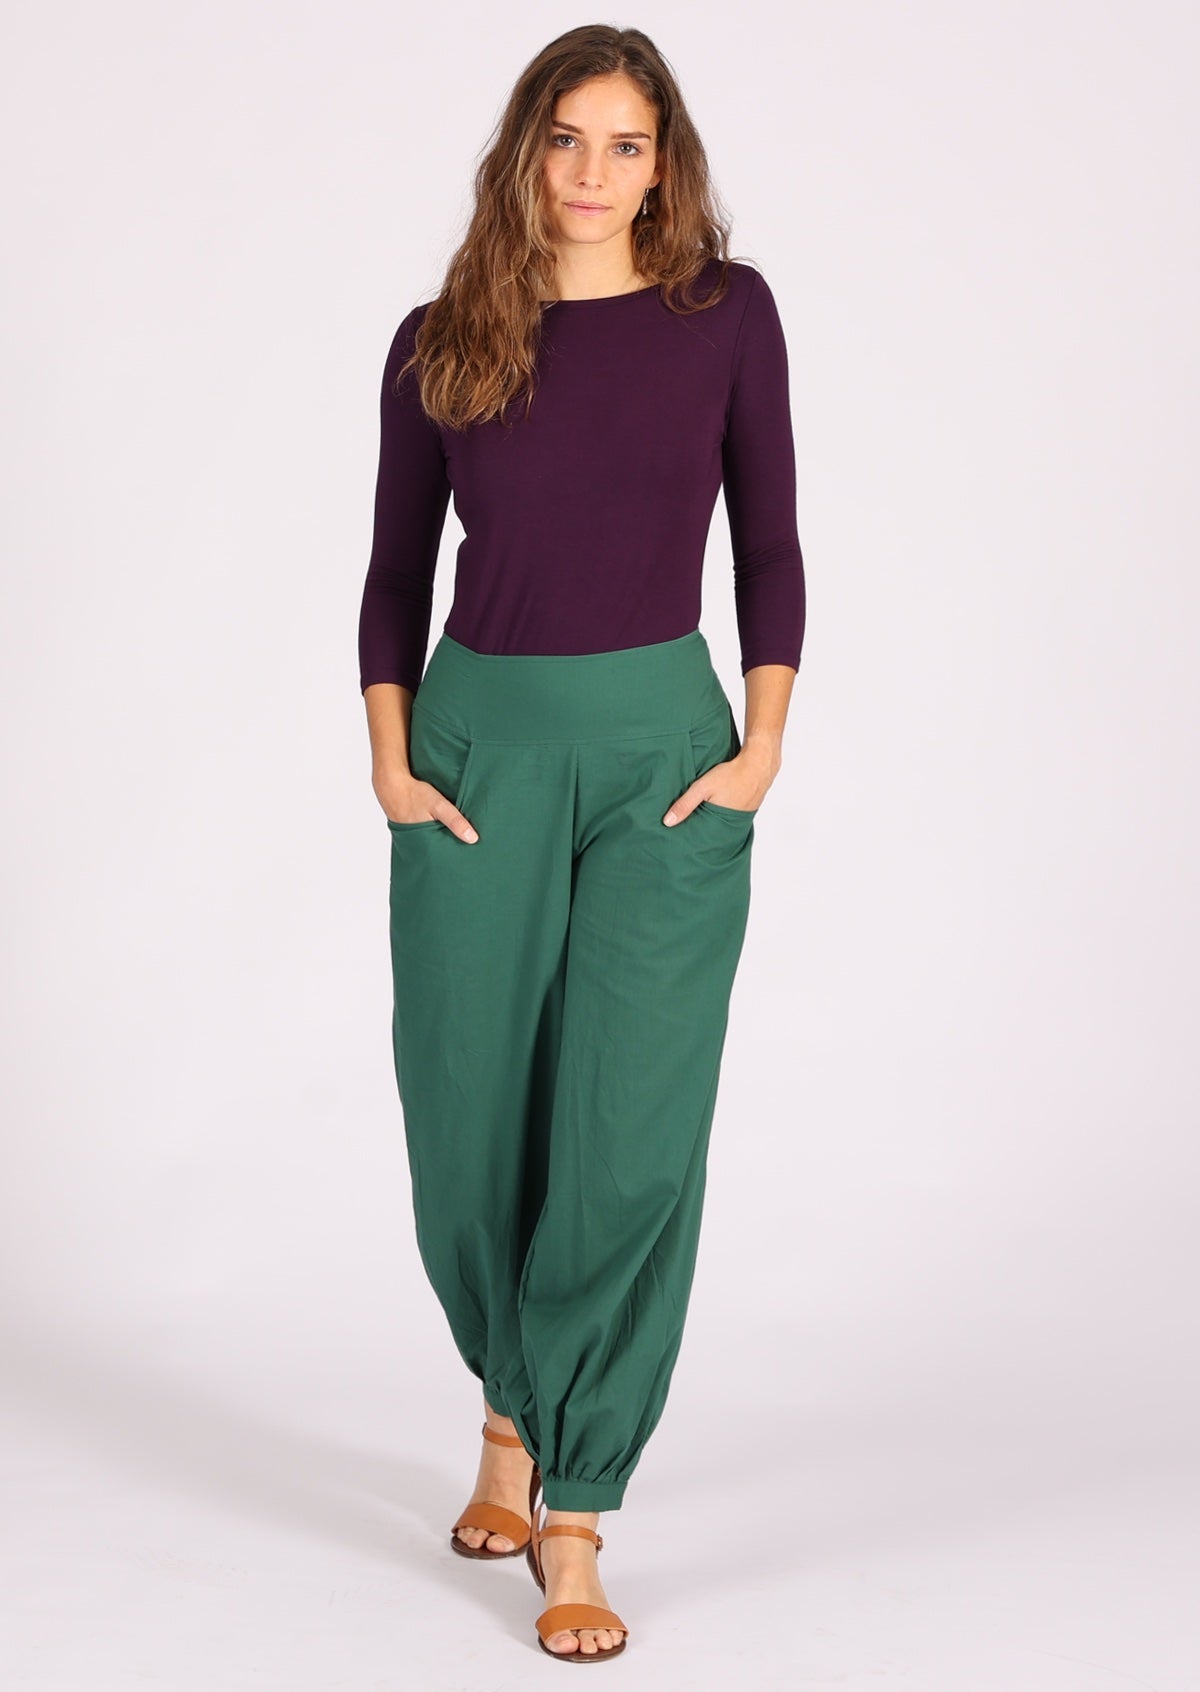 Lightweight cotton harem pants with pockets and cuffed ankles